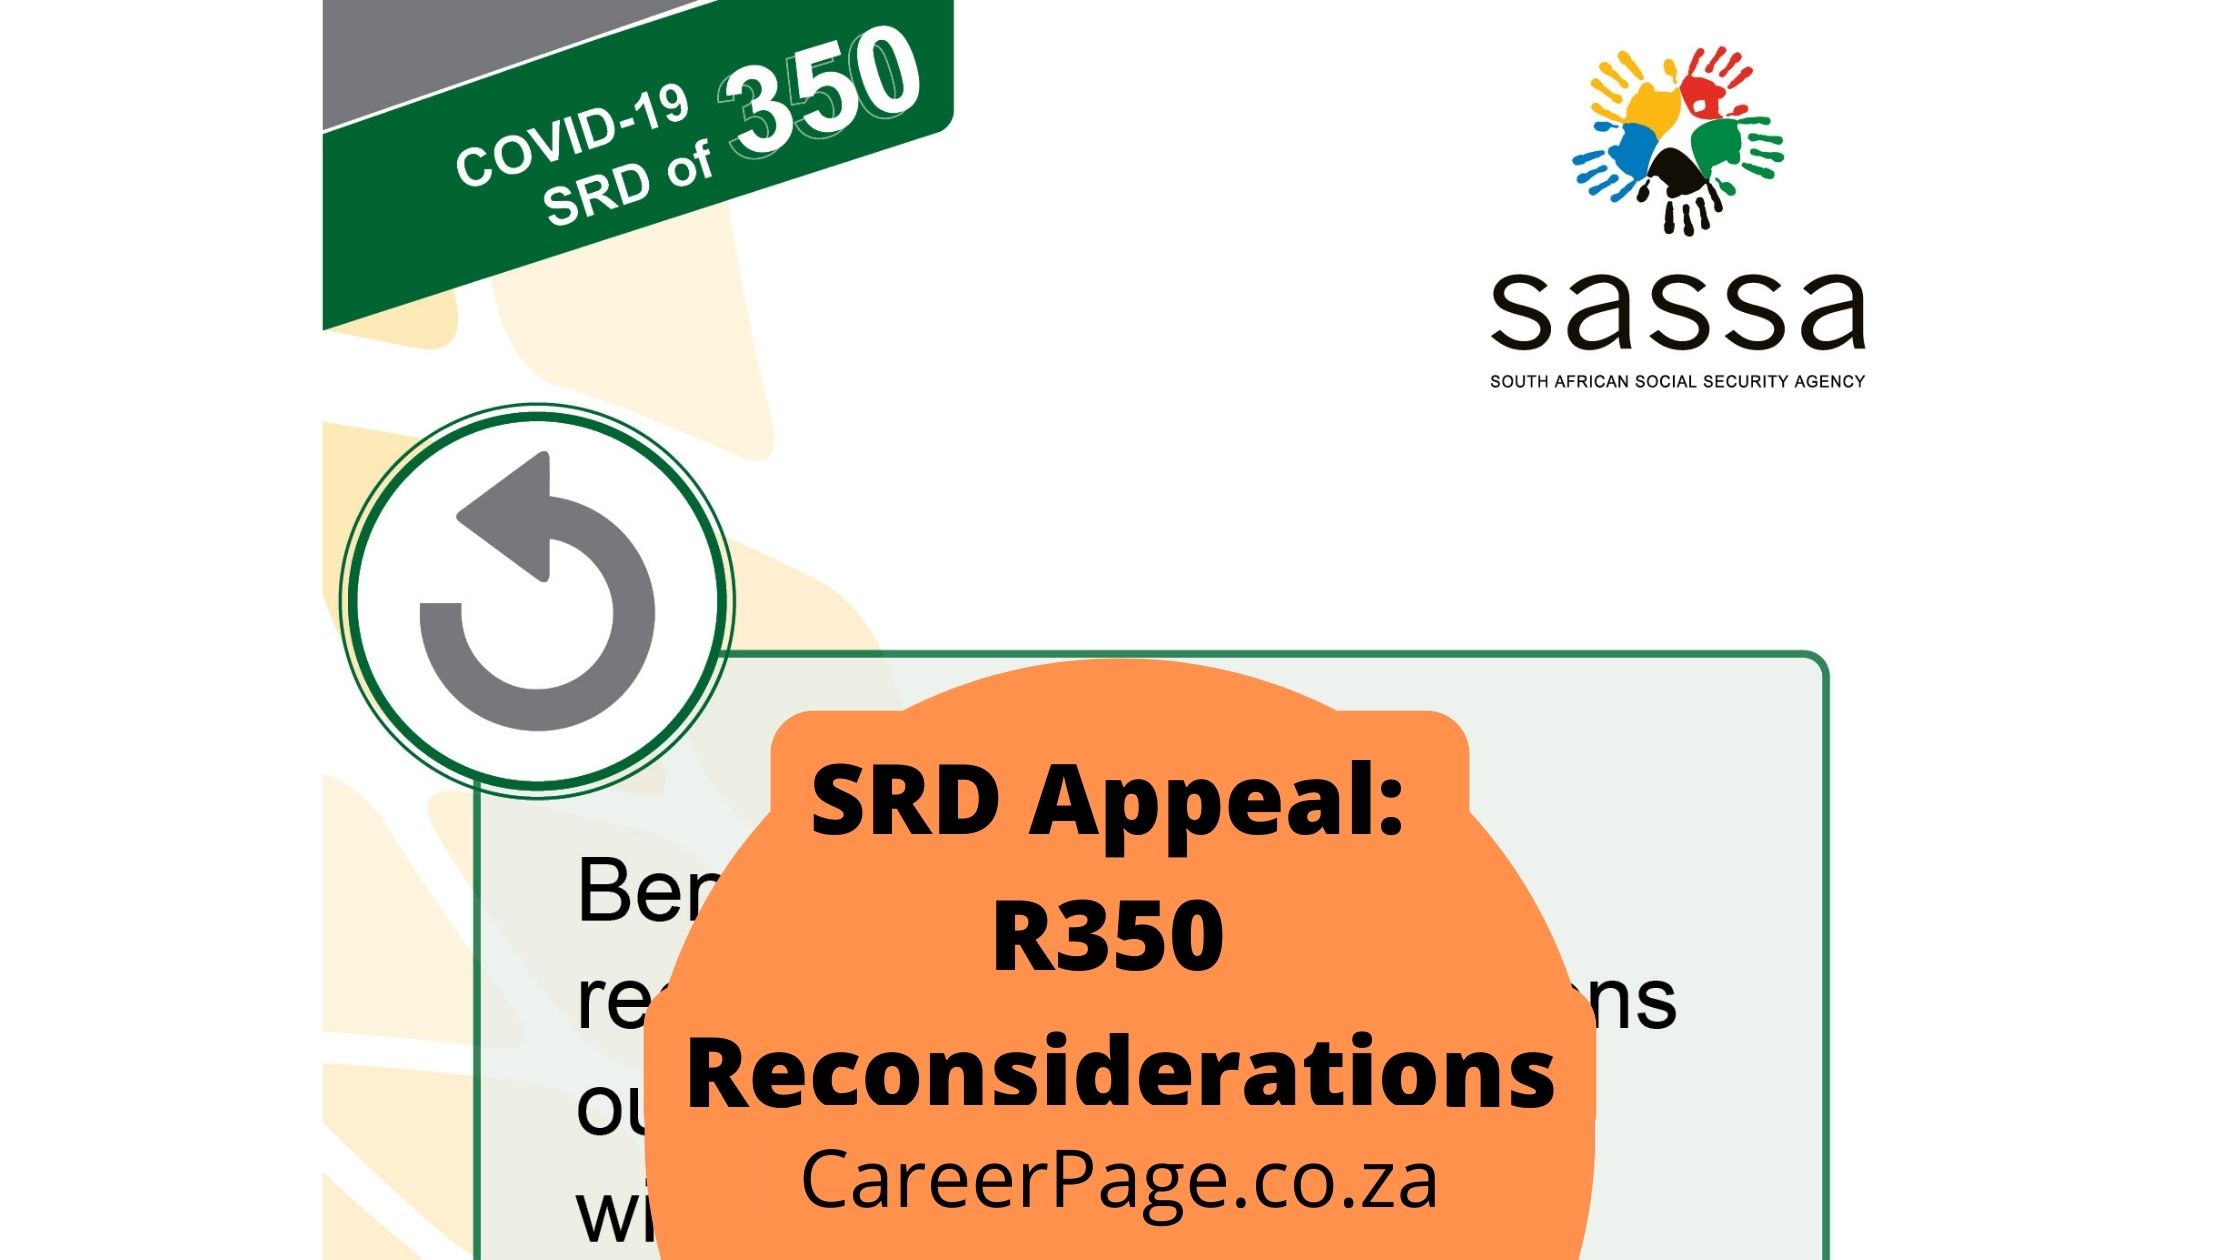 How To Do Appeal For R350 SRD